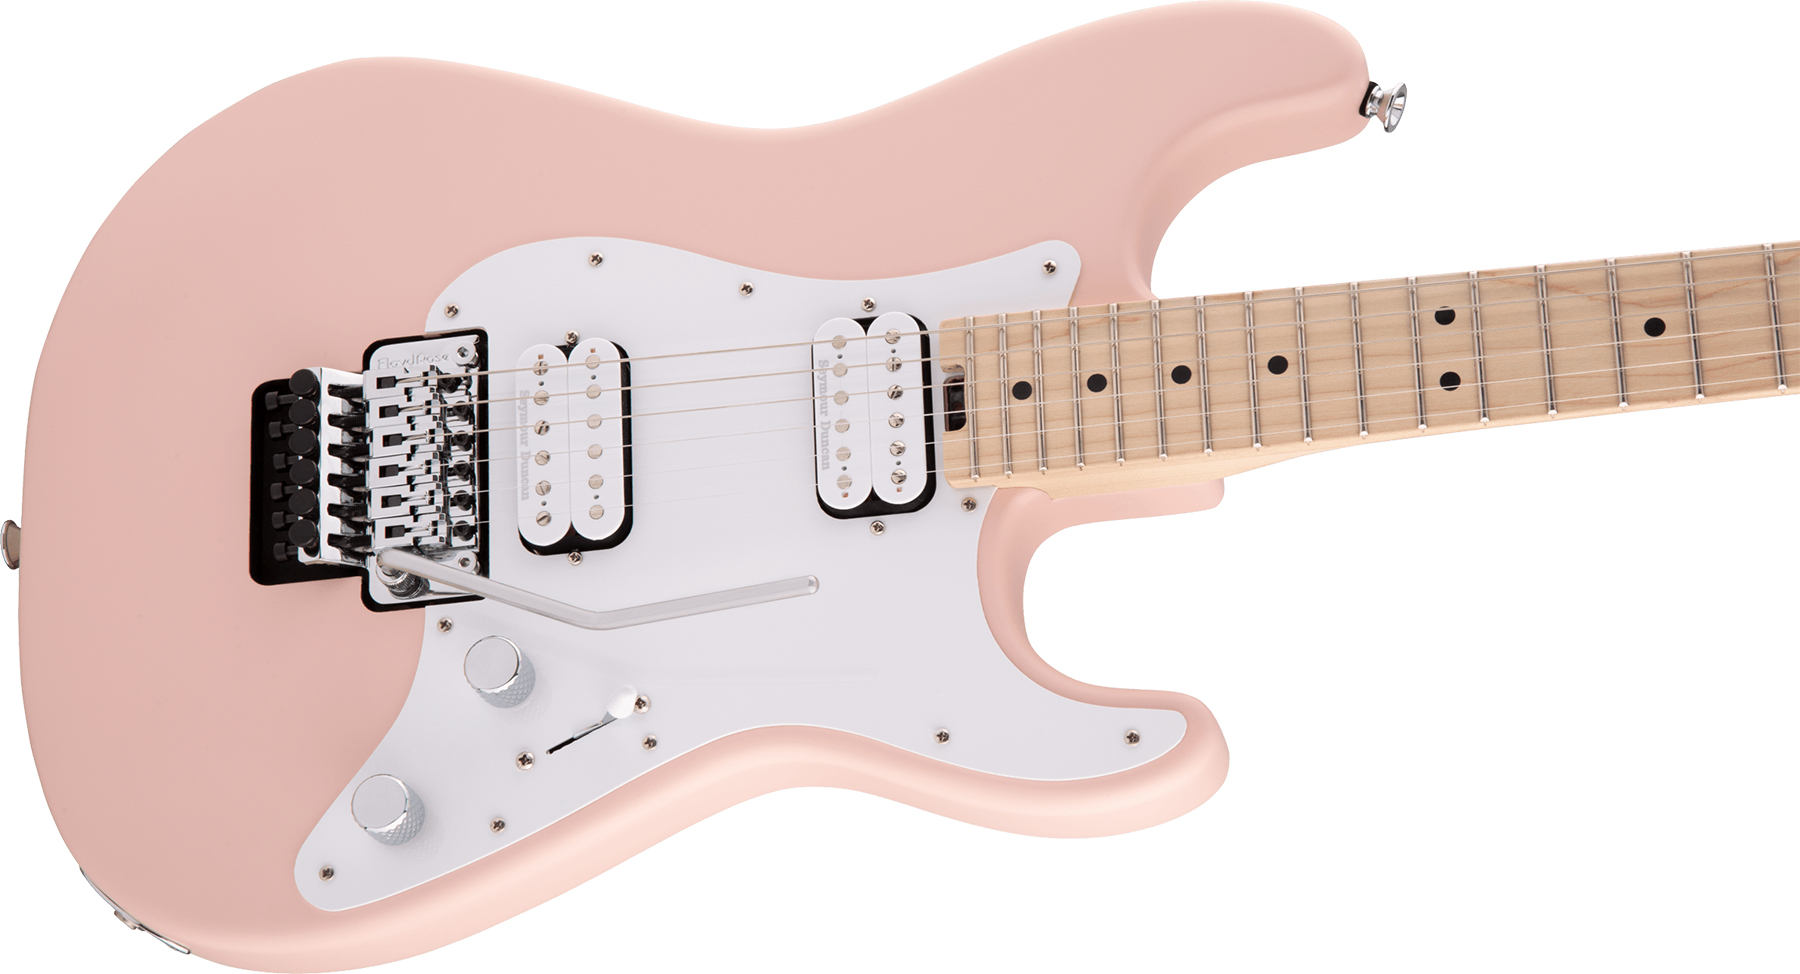 Charvel So-cal Style 1 Hh  Fr M Pro-mod 2h Seymour Duncan Mn - Satin Shell Pink - Str shape electric guitar - Variation 2